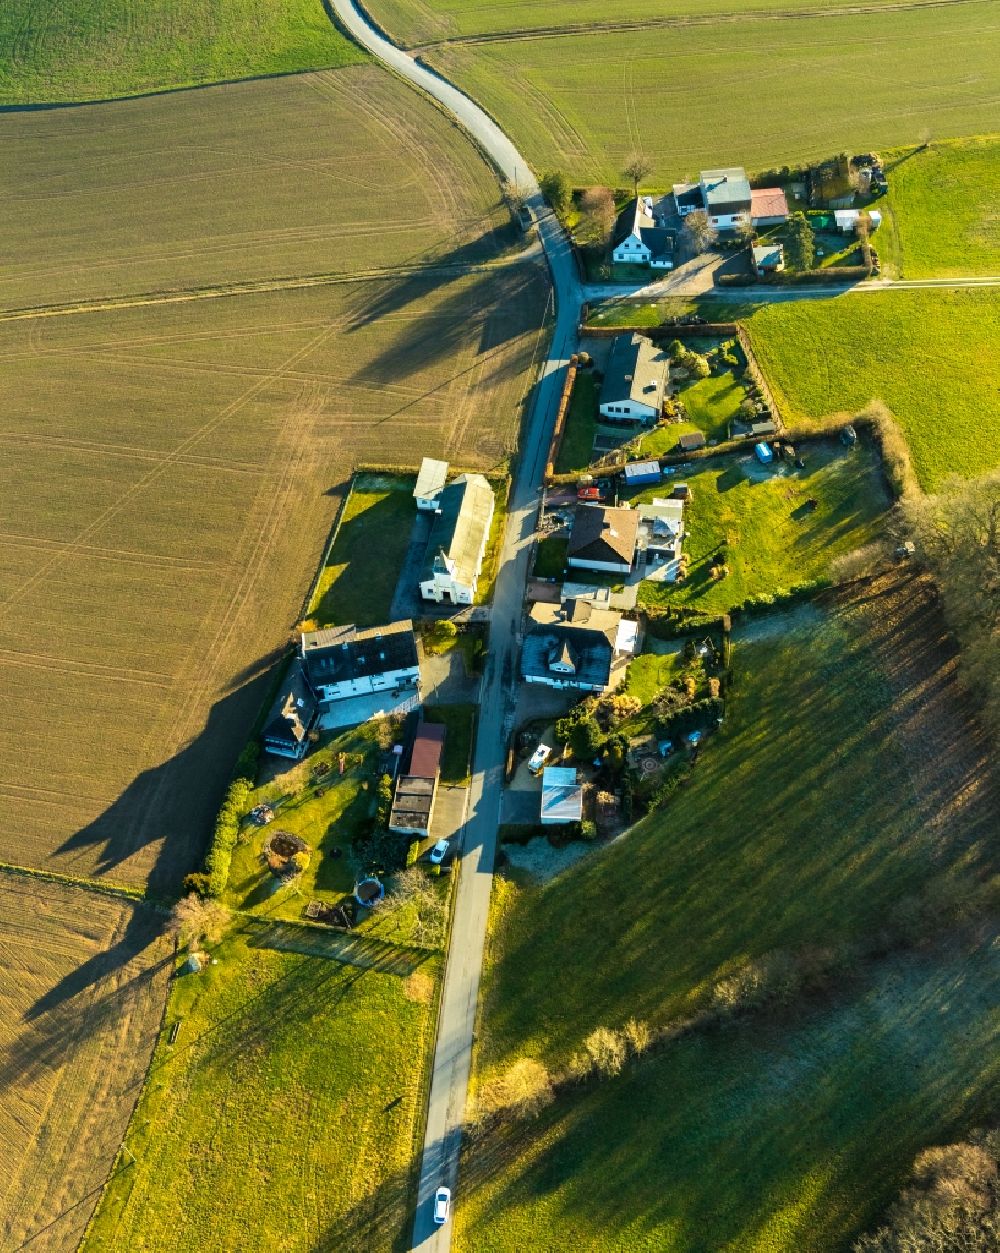 Ennepetal from the bird's eye view: Village view on the edge of agricultural fields and land along the Koenigsfelder Strasse in Ennepetal in the state North Rhine-Westphalia, Germany